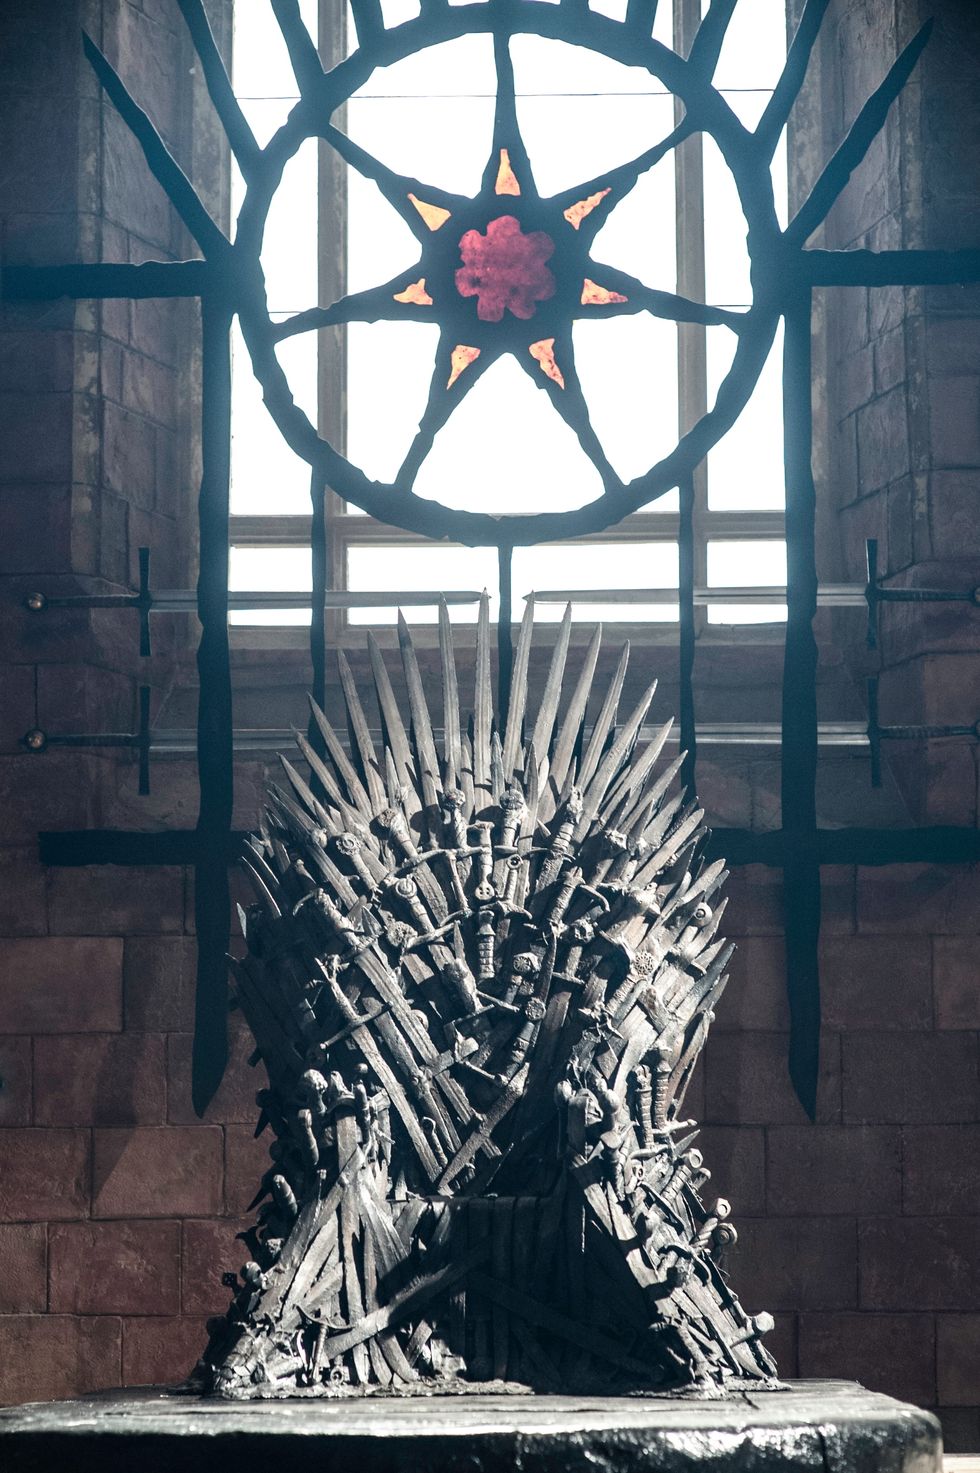 the iconic iron throne from ﻿game of thrones﻿